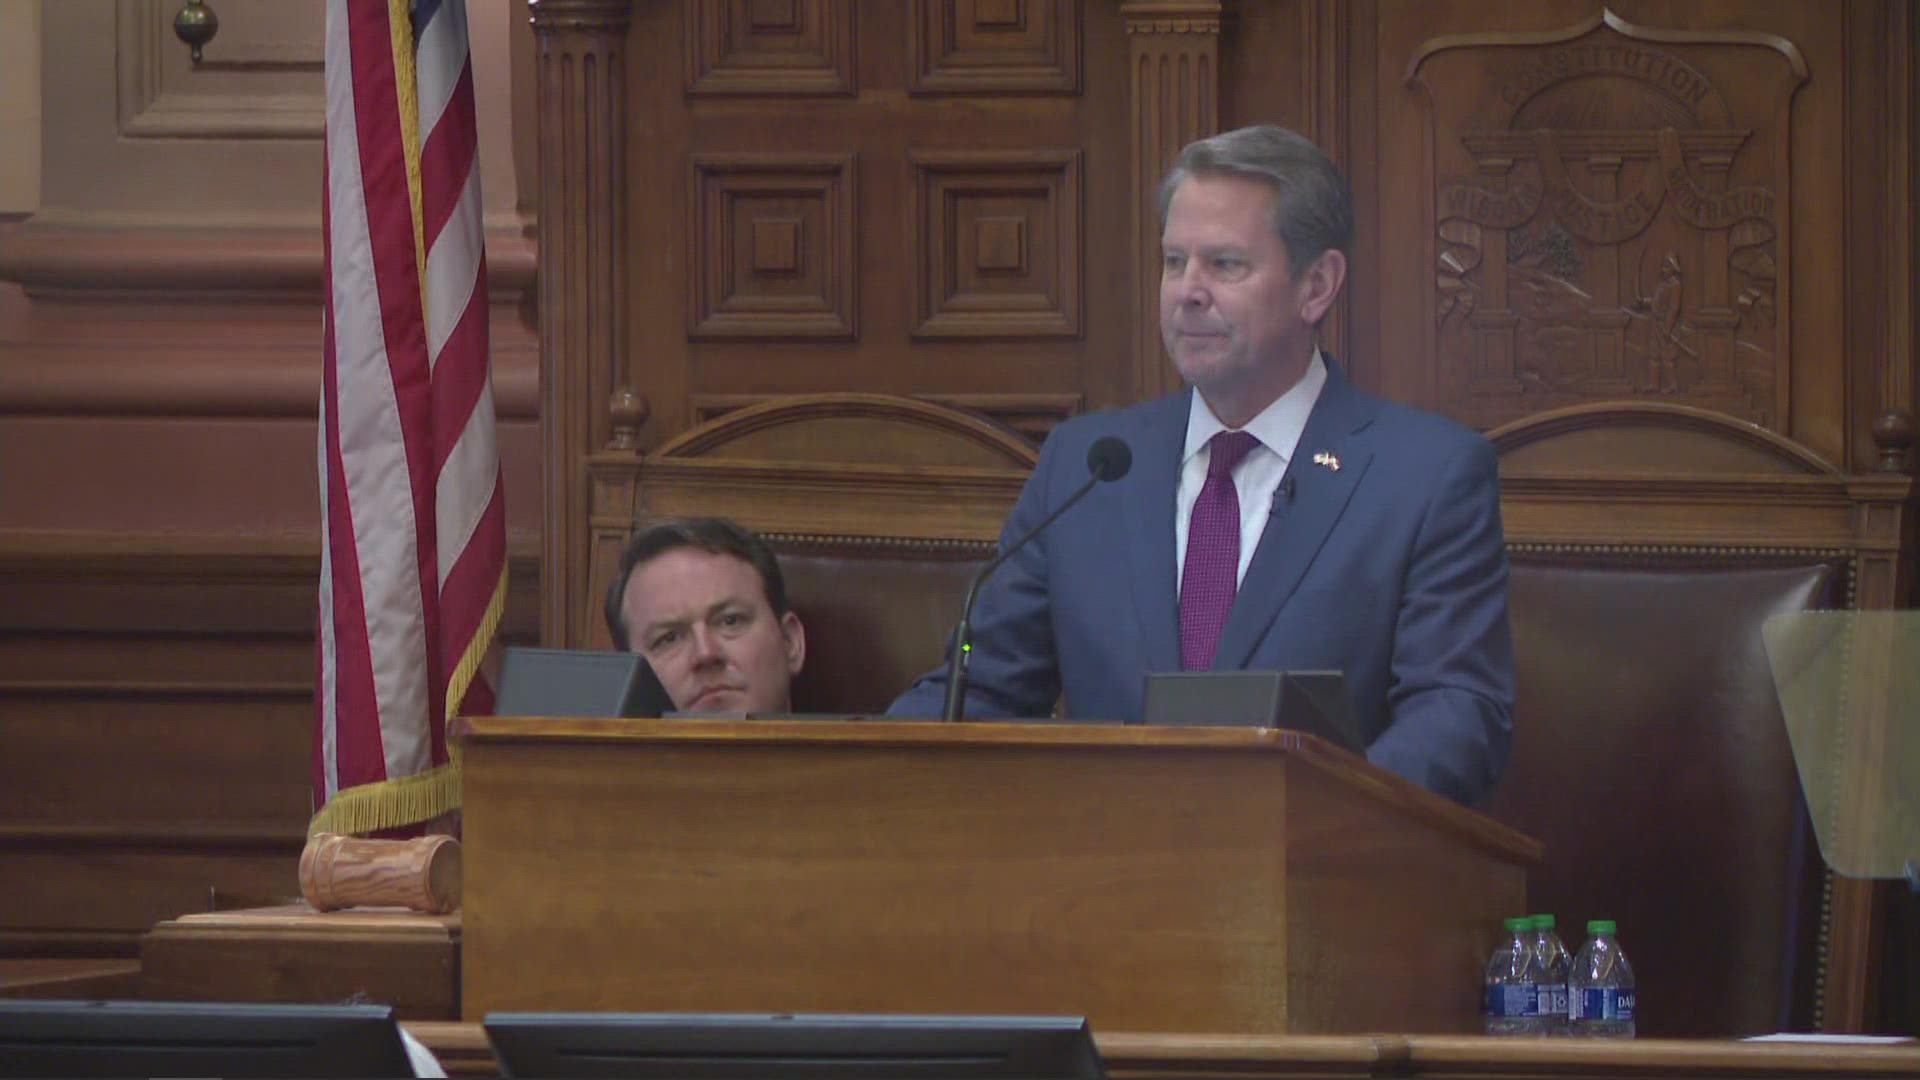 On Wednesday morning, Kemp discussed his goals for his second term as governor, which included promises of funding for education.